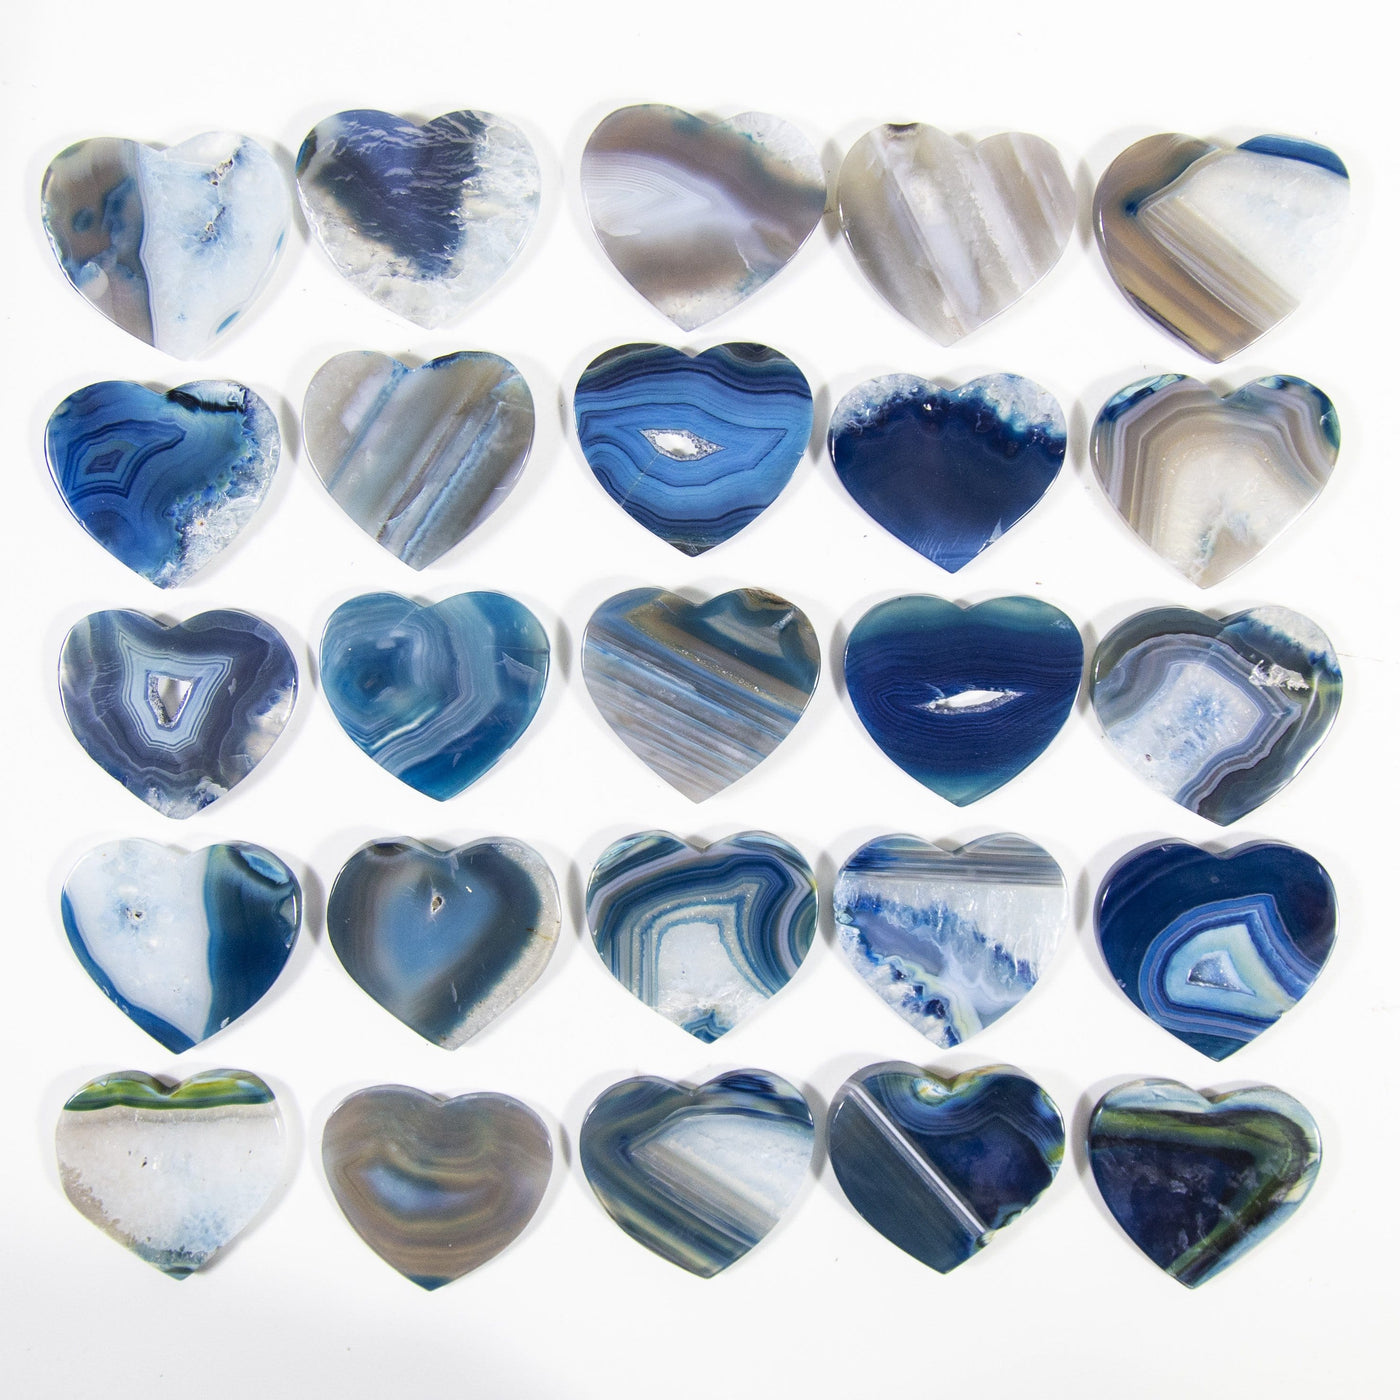 Multiple blue agate Heart Shaped Cabochons displayed on a white background to display color and pattern variation.